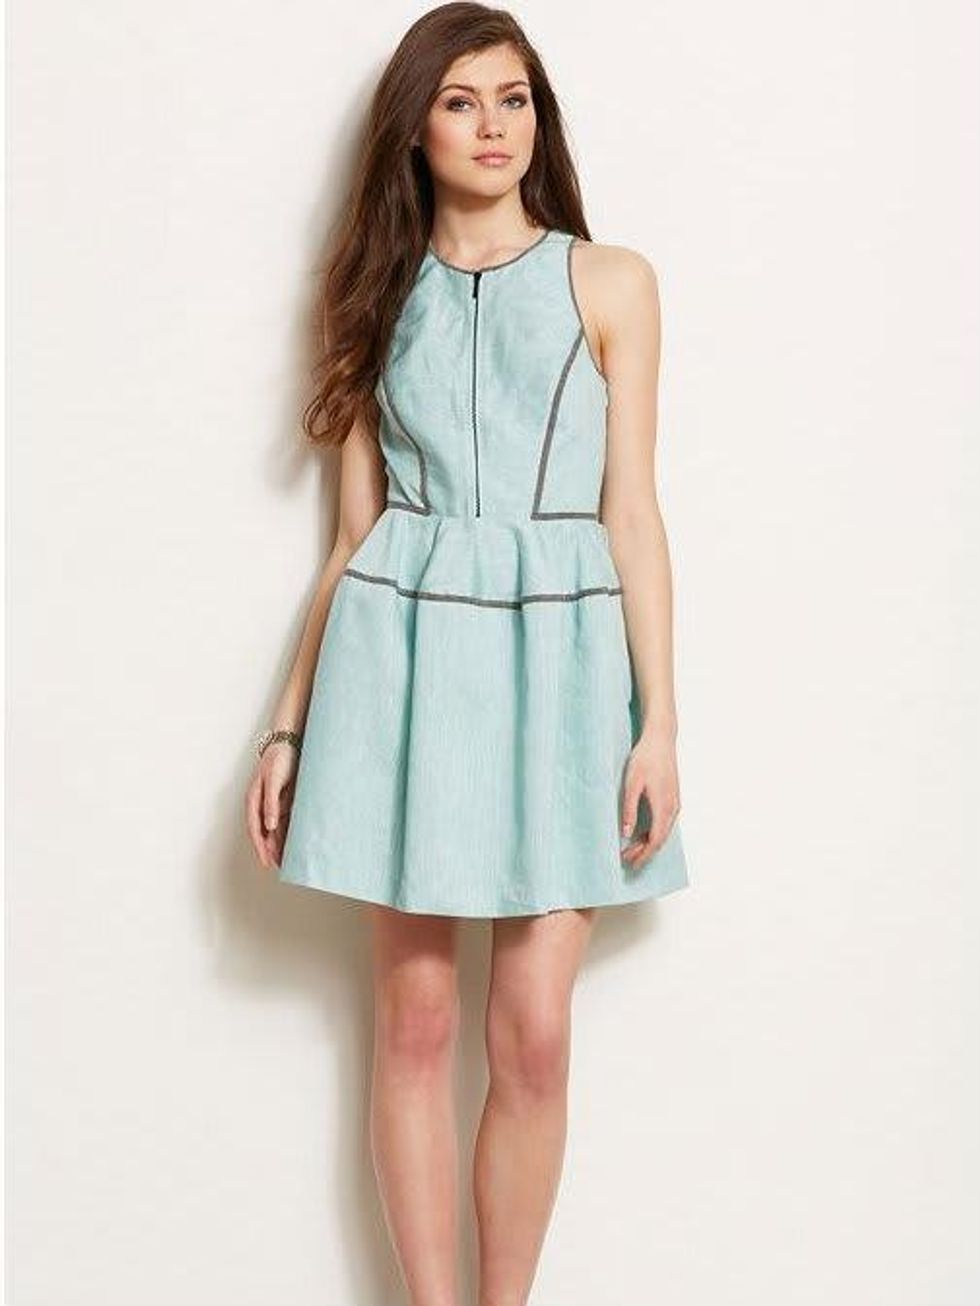 10 fabulous frocks for all those spring soirees - CultureMap Dallas